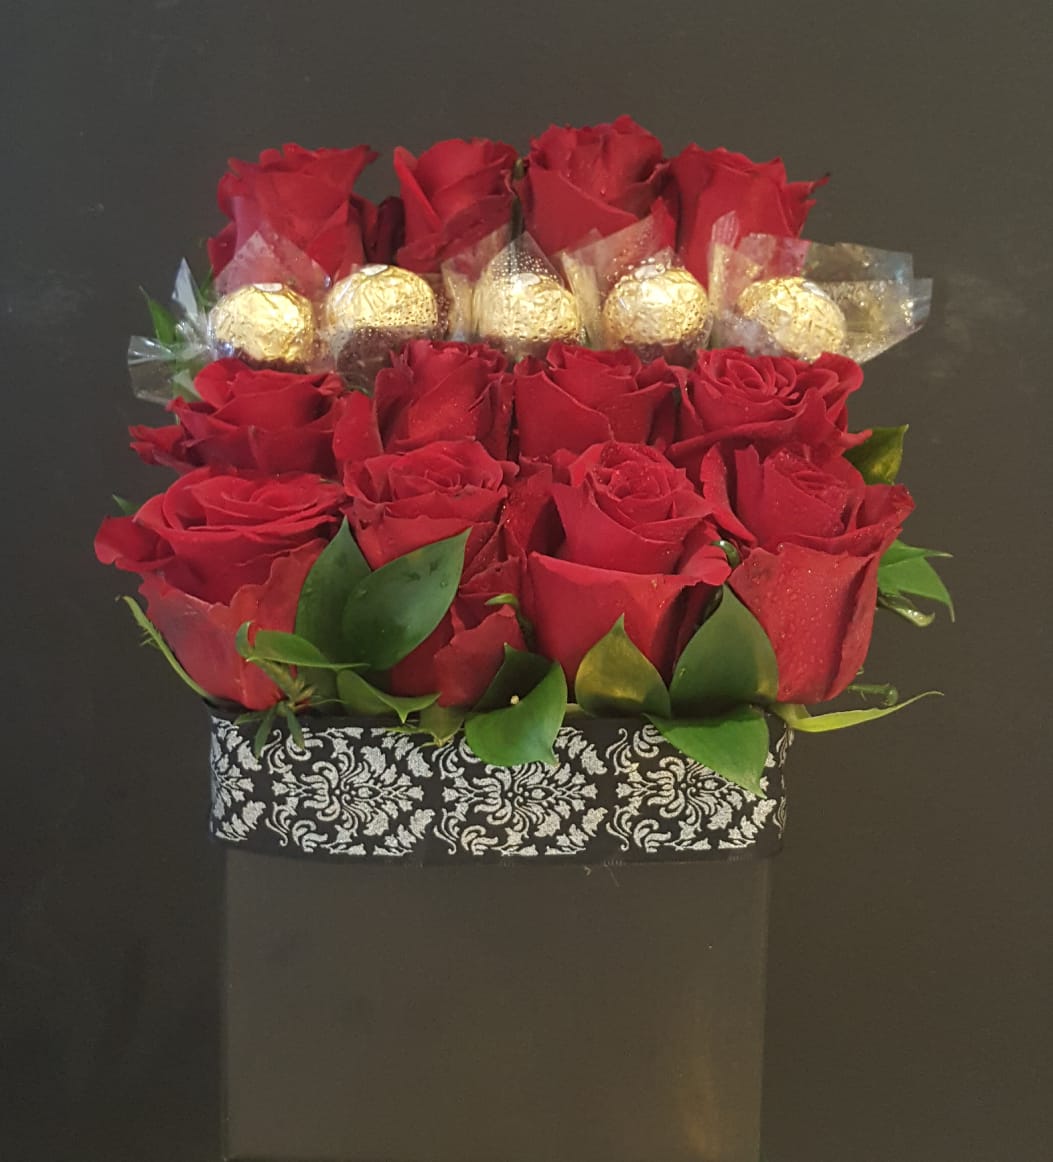 6 Roses & 3 Ferro Roche - R500 8 Roses & 4 Ferro Roche - R600 9 Roses - R550 12 Roses - R660 Includes greenery, baby breathe and elegant black box.